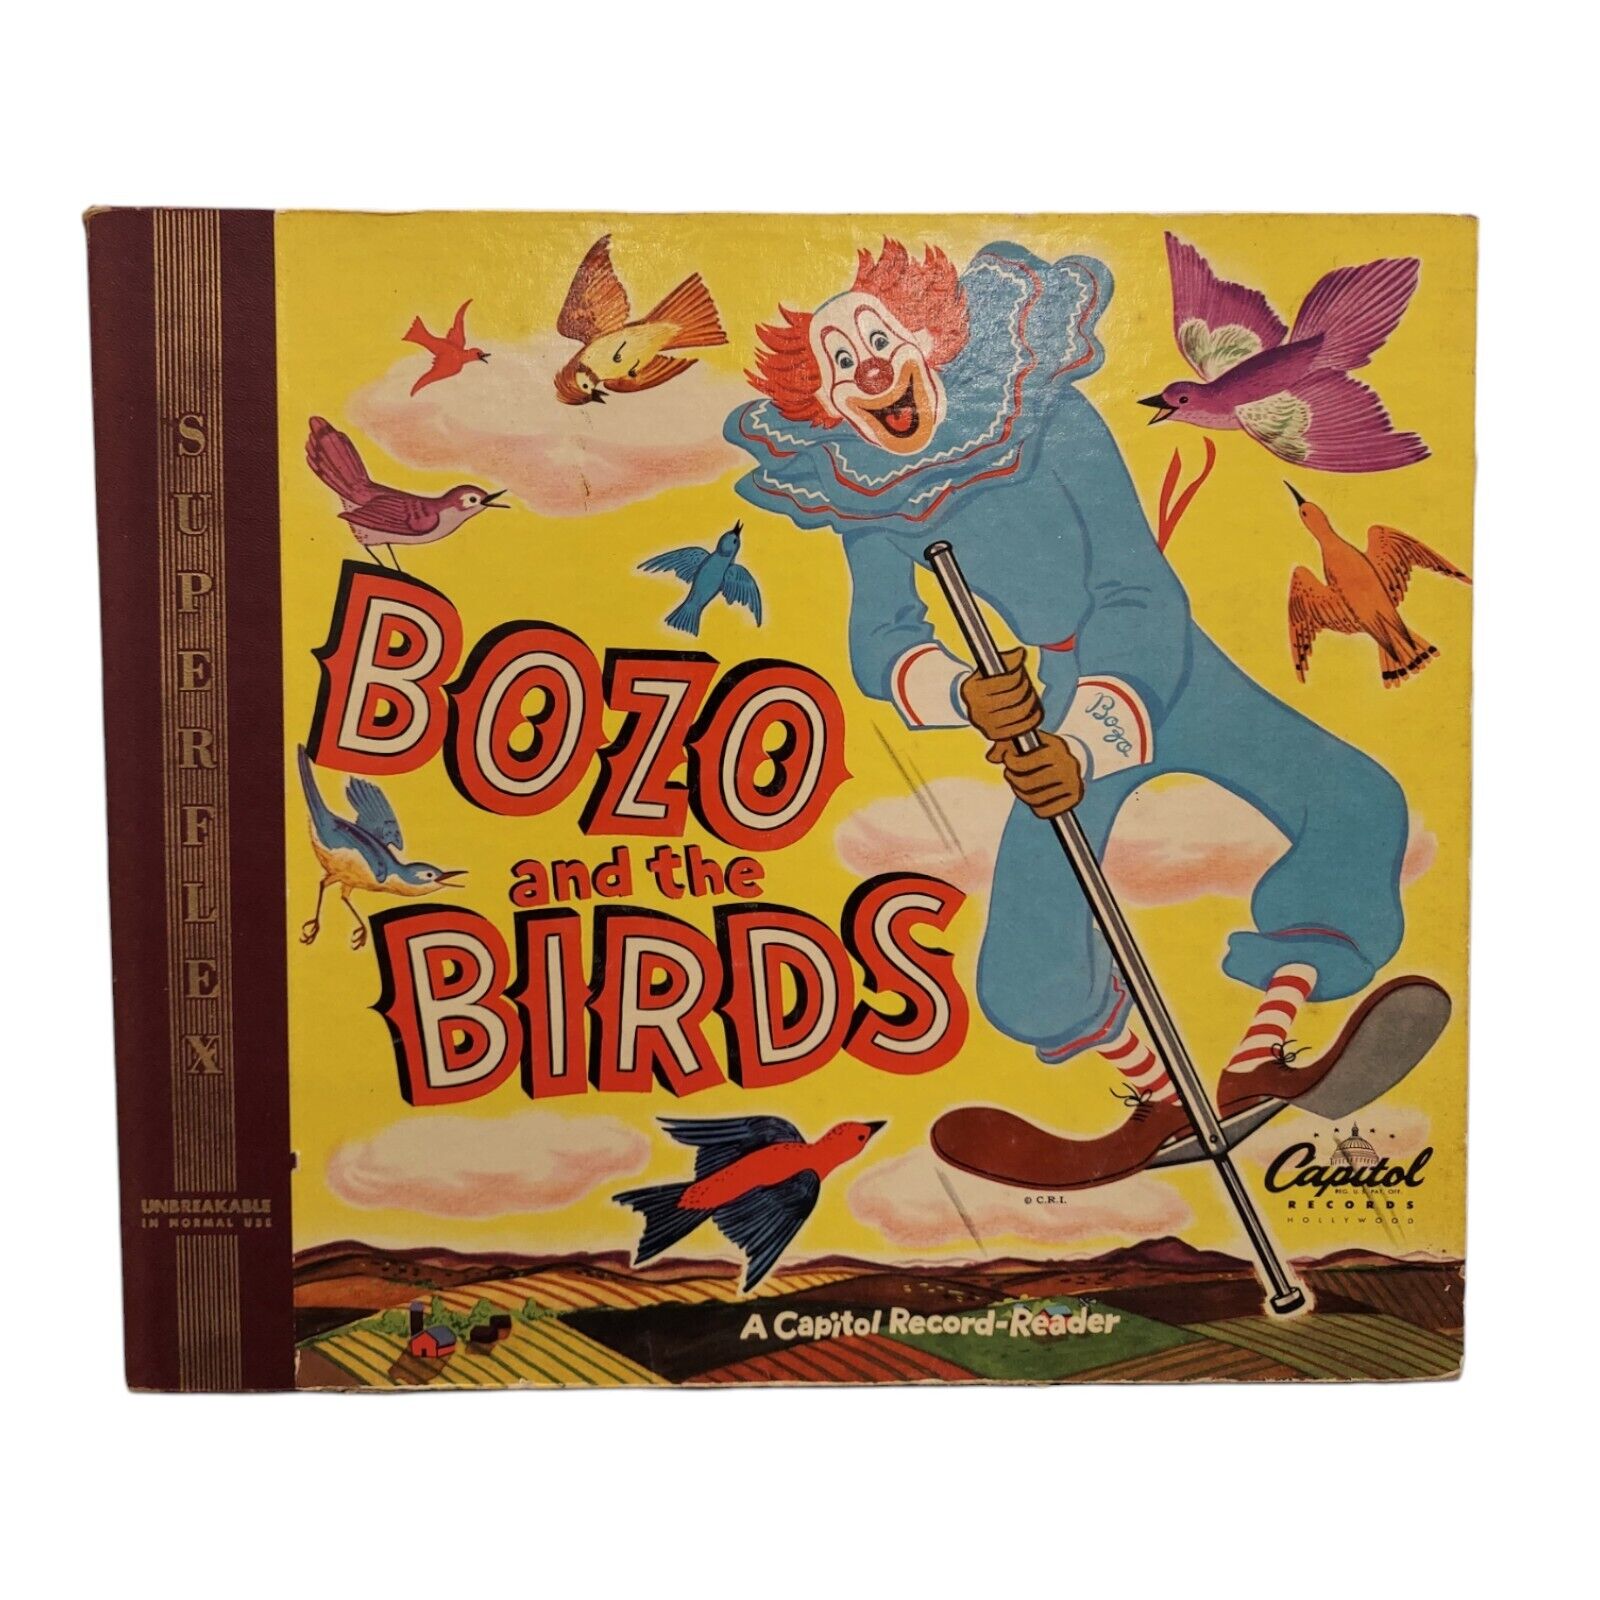 VTG Bozo and the Birds STORYBOOK +2 vinyl LPs records 1949 clown Capital Records